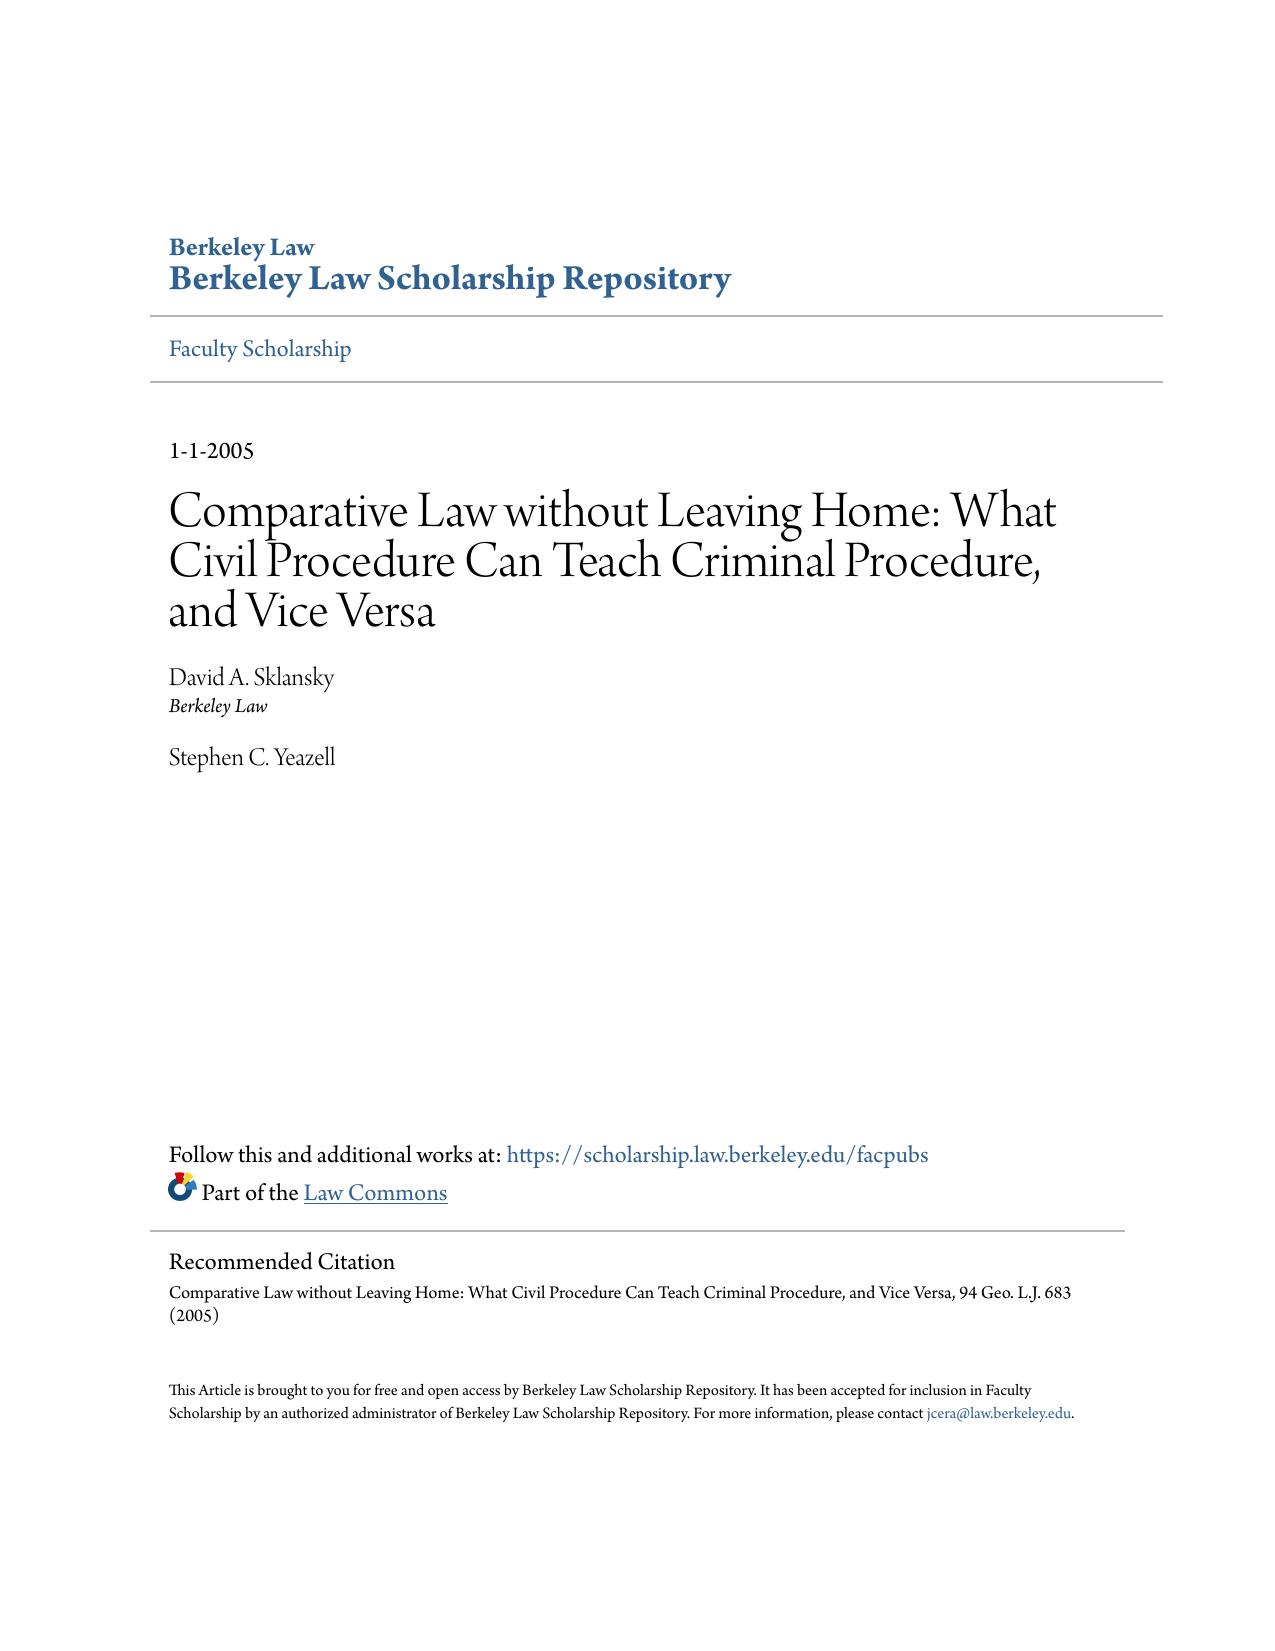 Comparative Law without Leaving Home: What Civil Procedure Can Teach Criminal Procedure, and Vice Versa